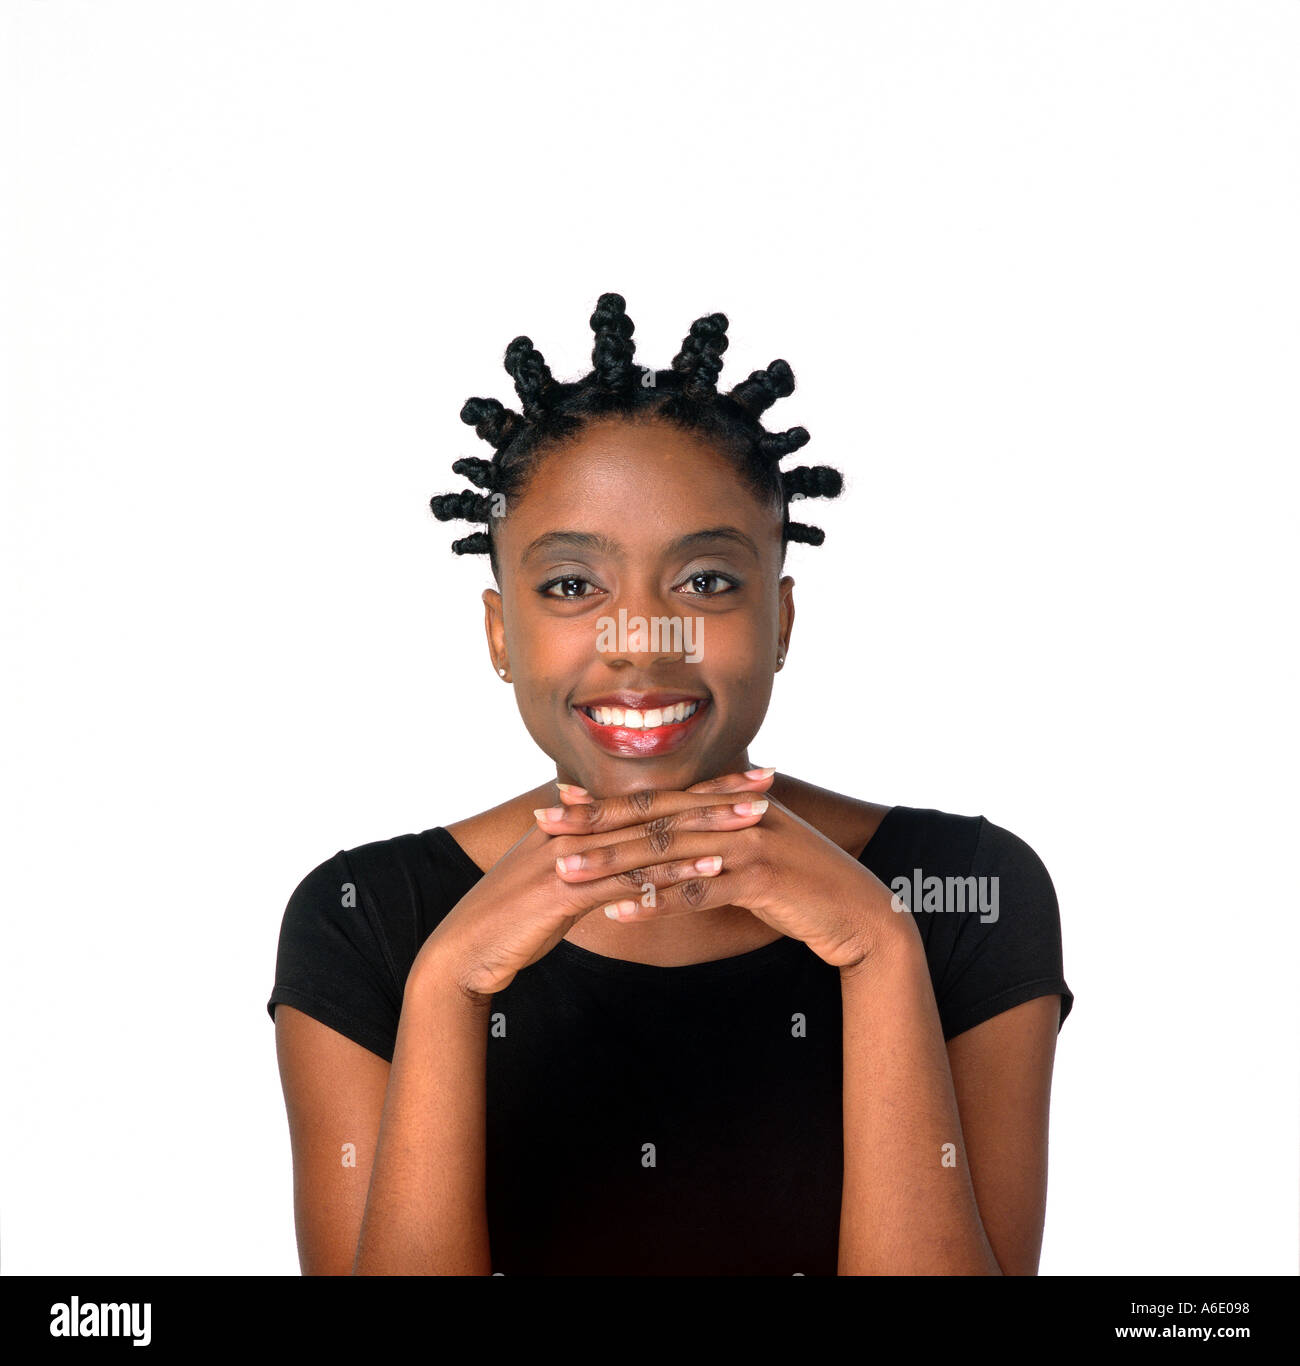 African american woman with cornrow hair poses in portrait. Stock Photo